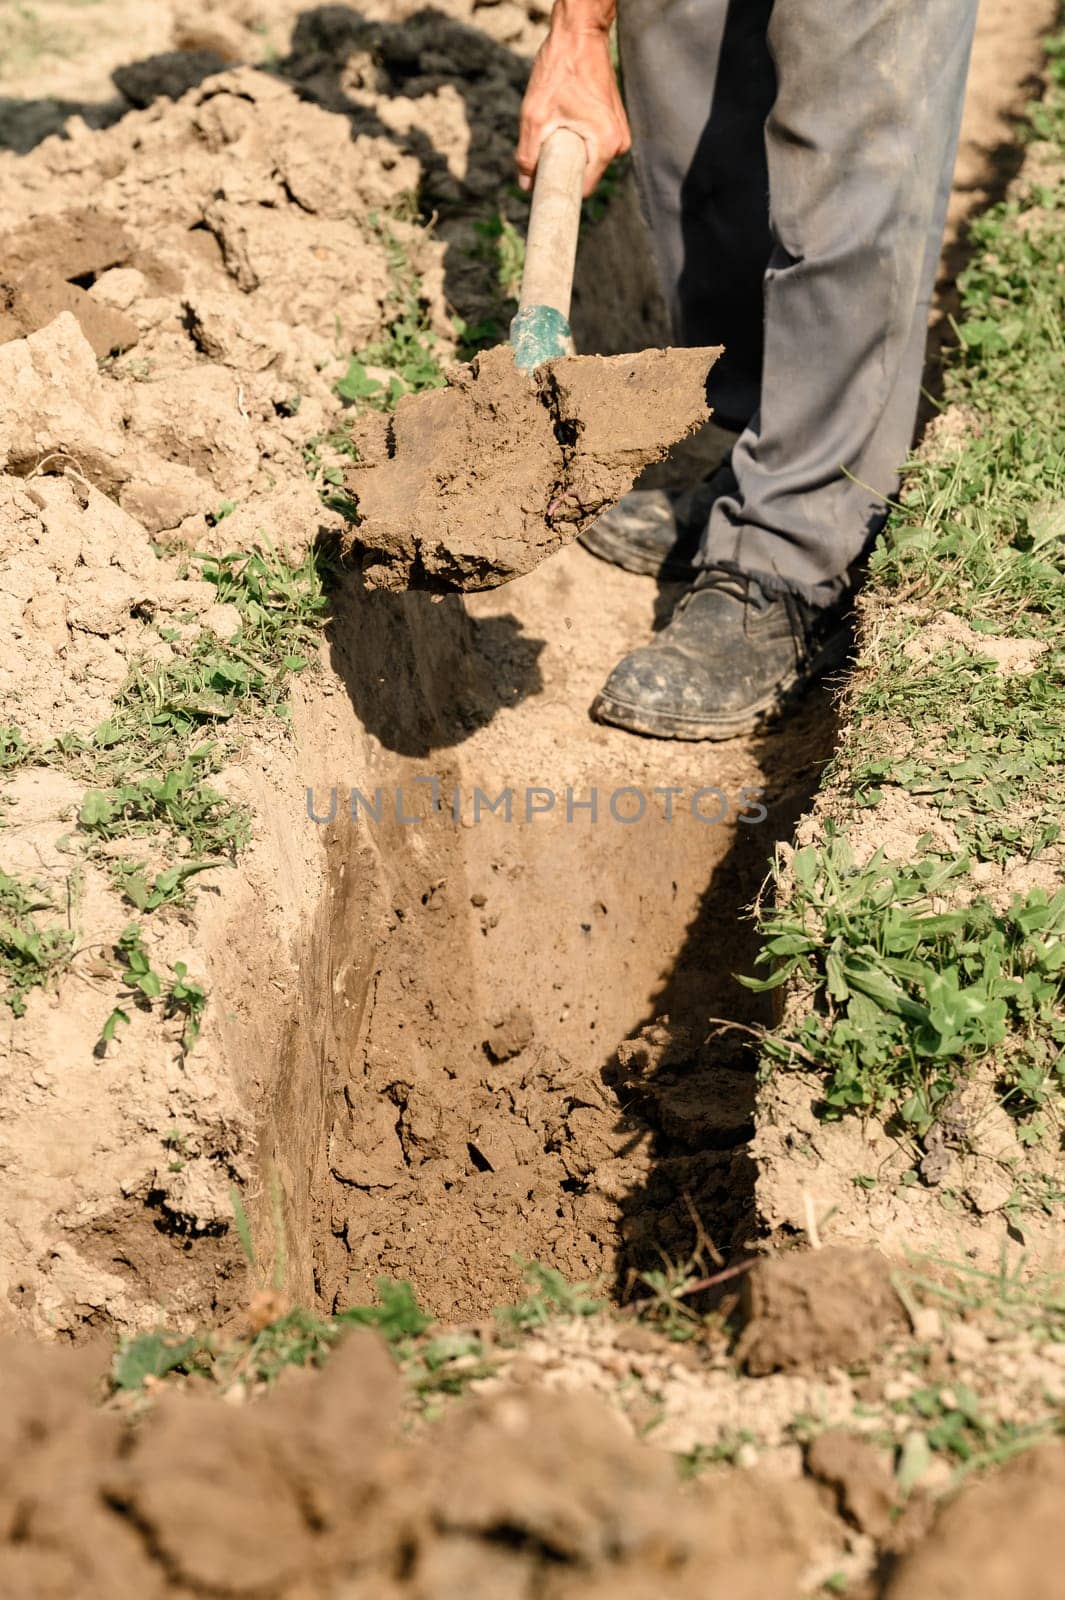 A man shovels a trench for drainage and sewage, close up.